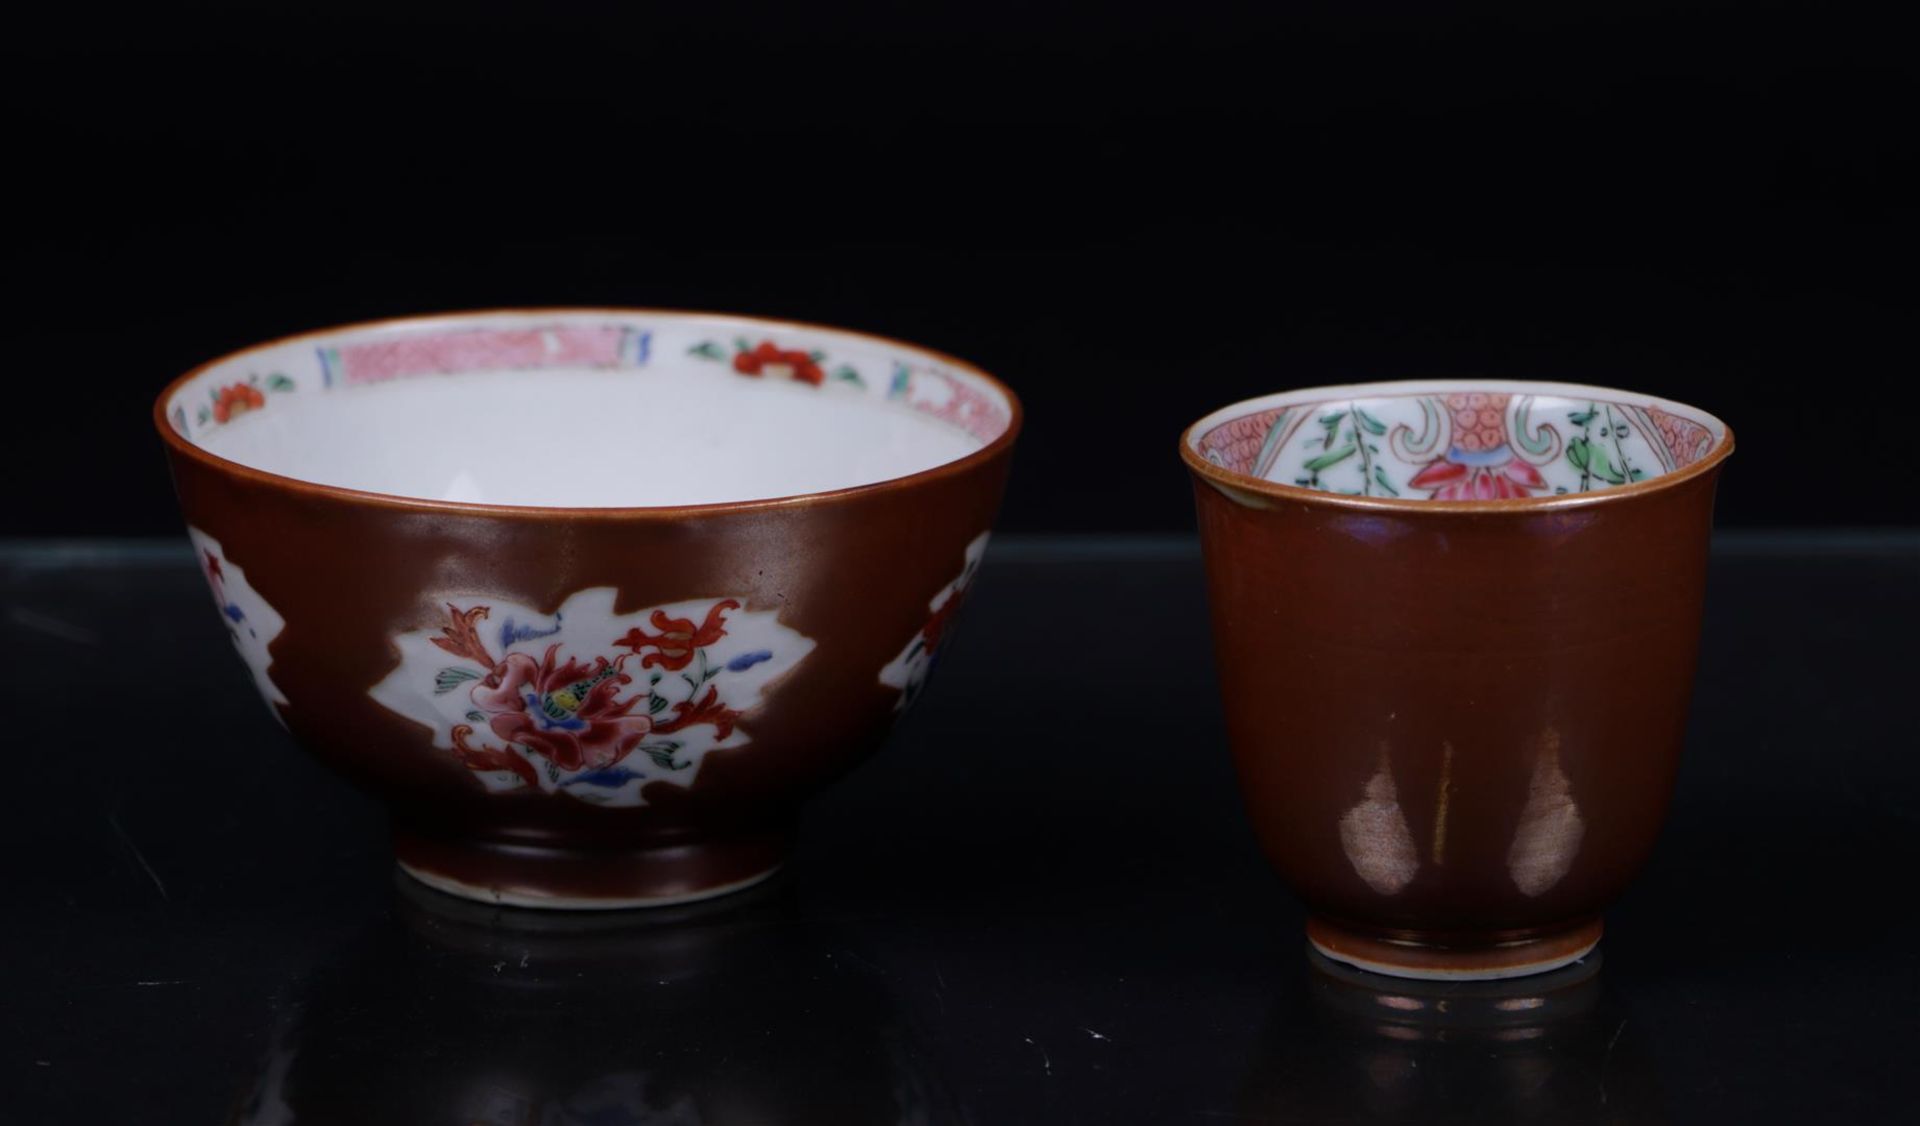 A porcelain bowl and cup, Capuchin/Famille-Rose leaf/bed decor. China, 18th century.